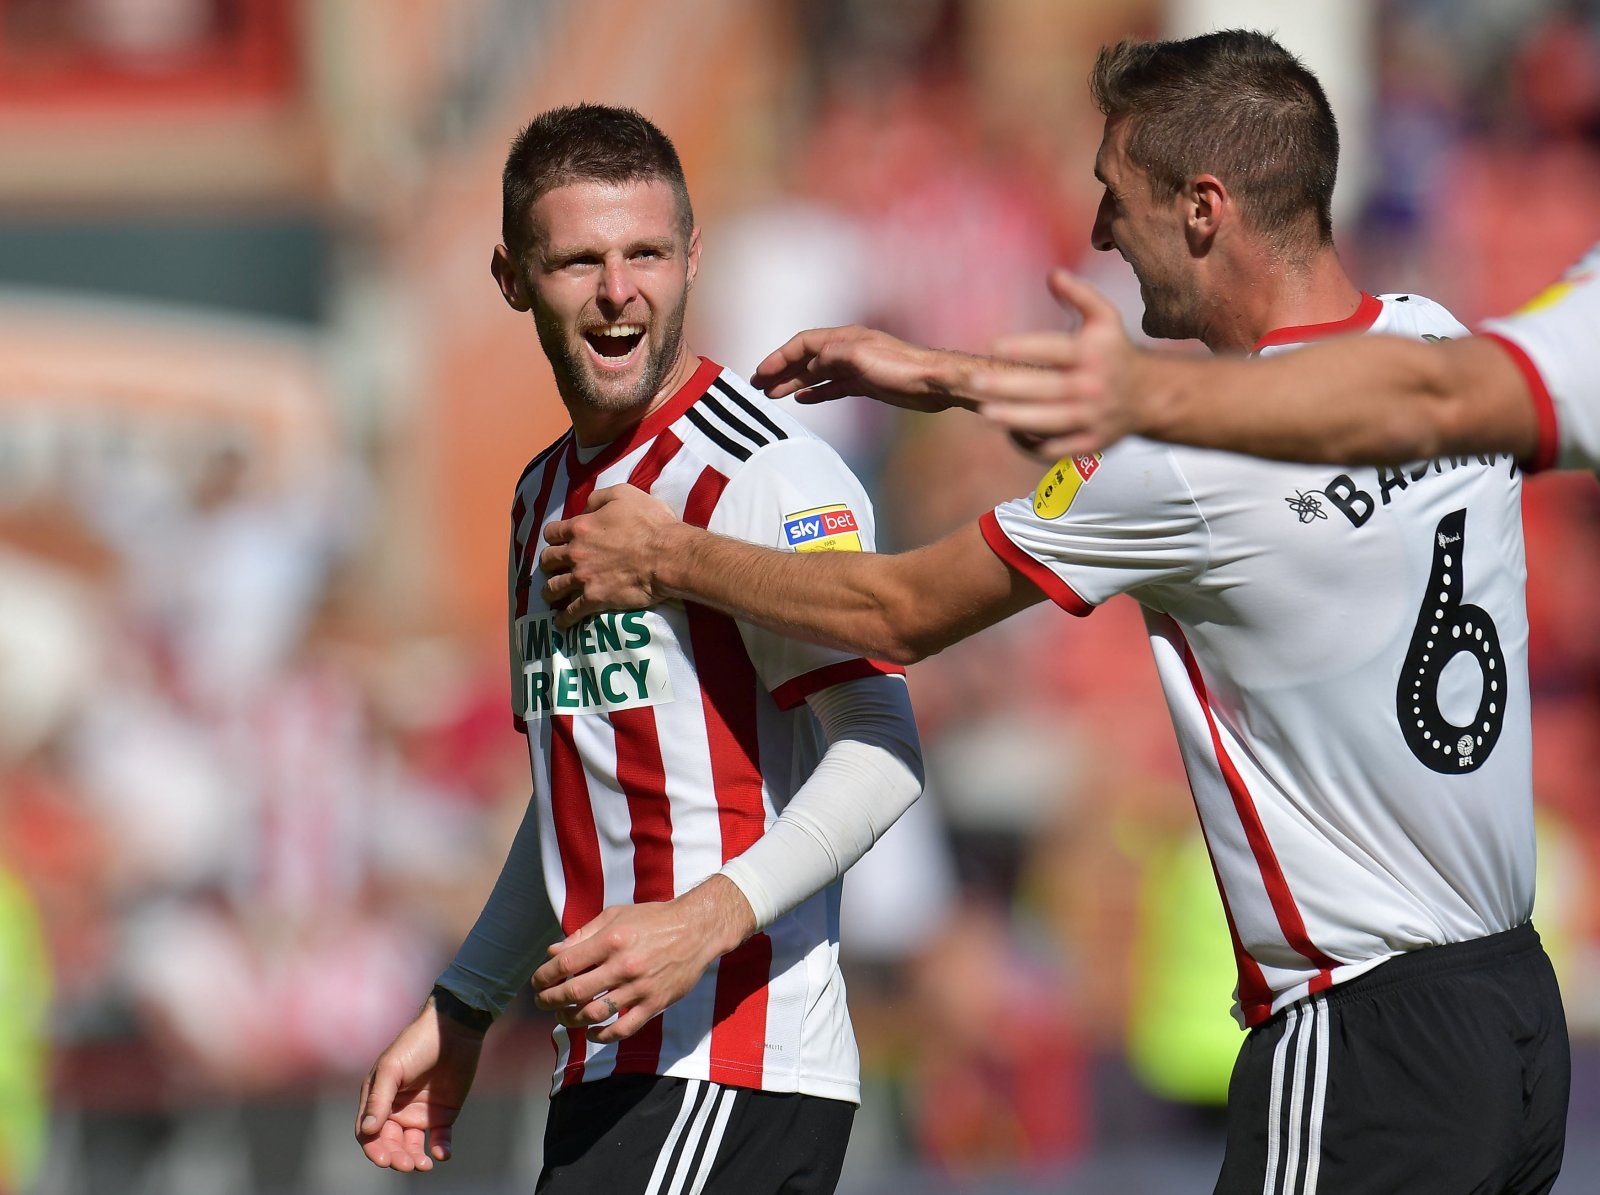 ‘Different class’ - These Sheffield United fans are delighted with 27-y